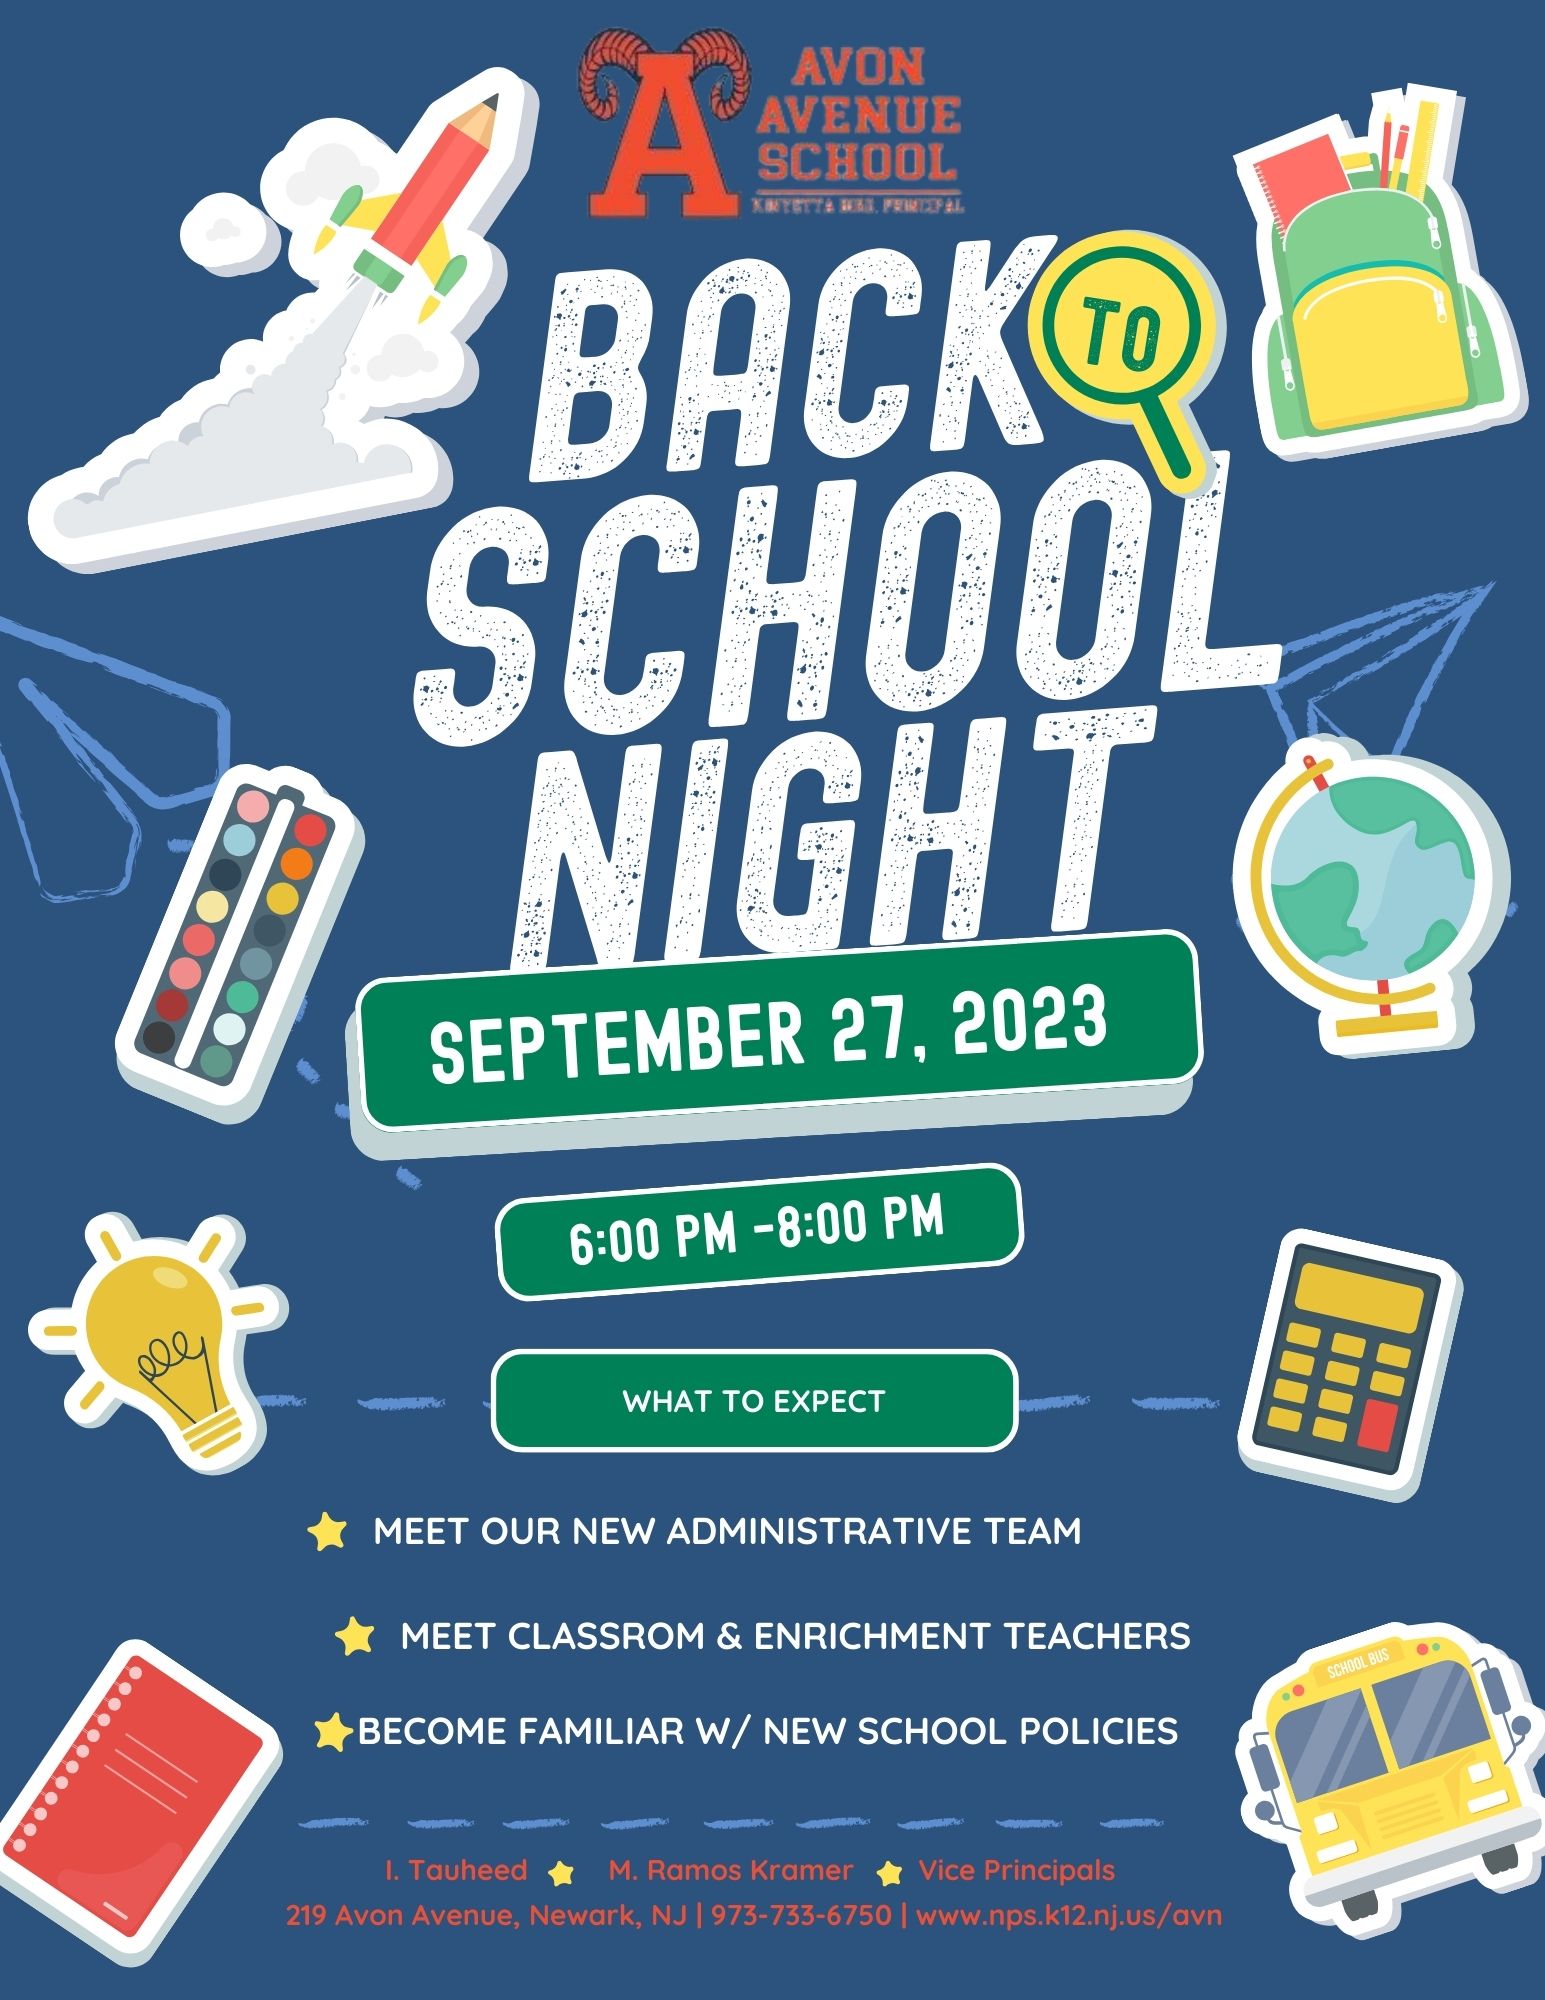 Back to School Night September 27, 2023 at 6:00 PM